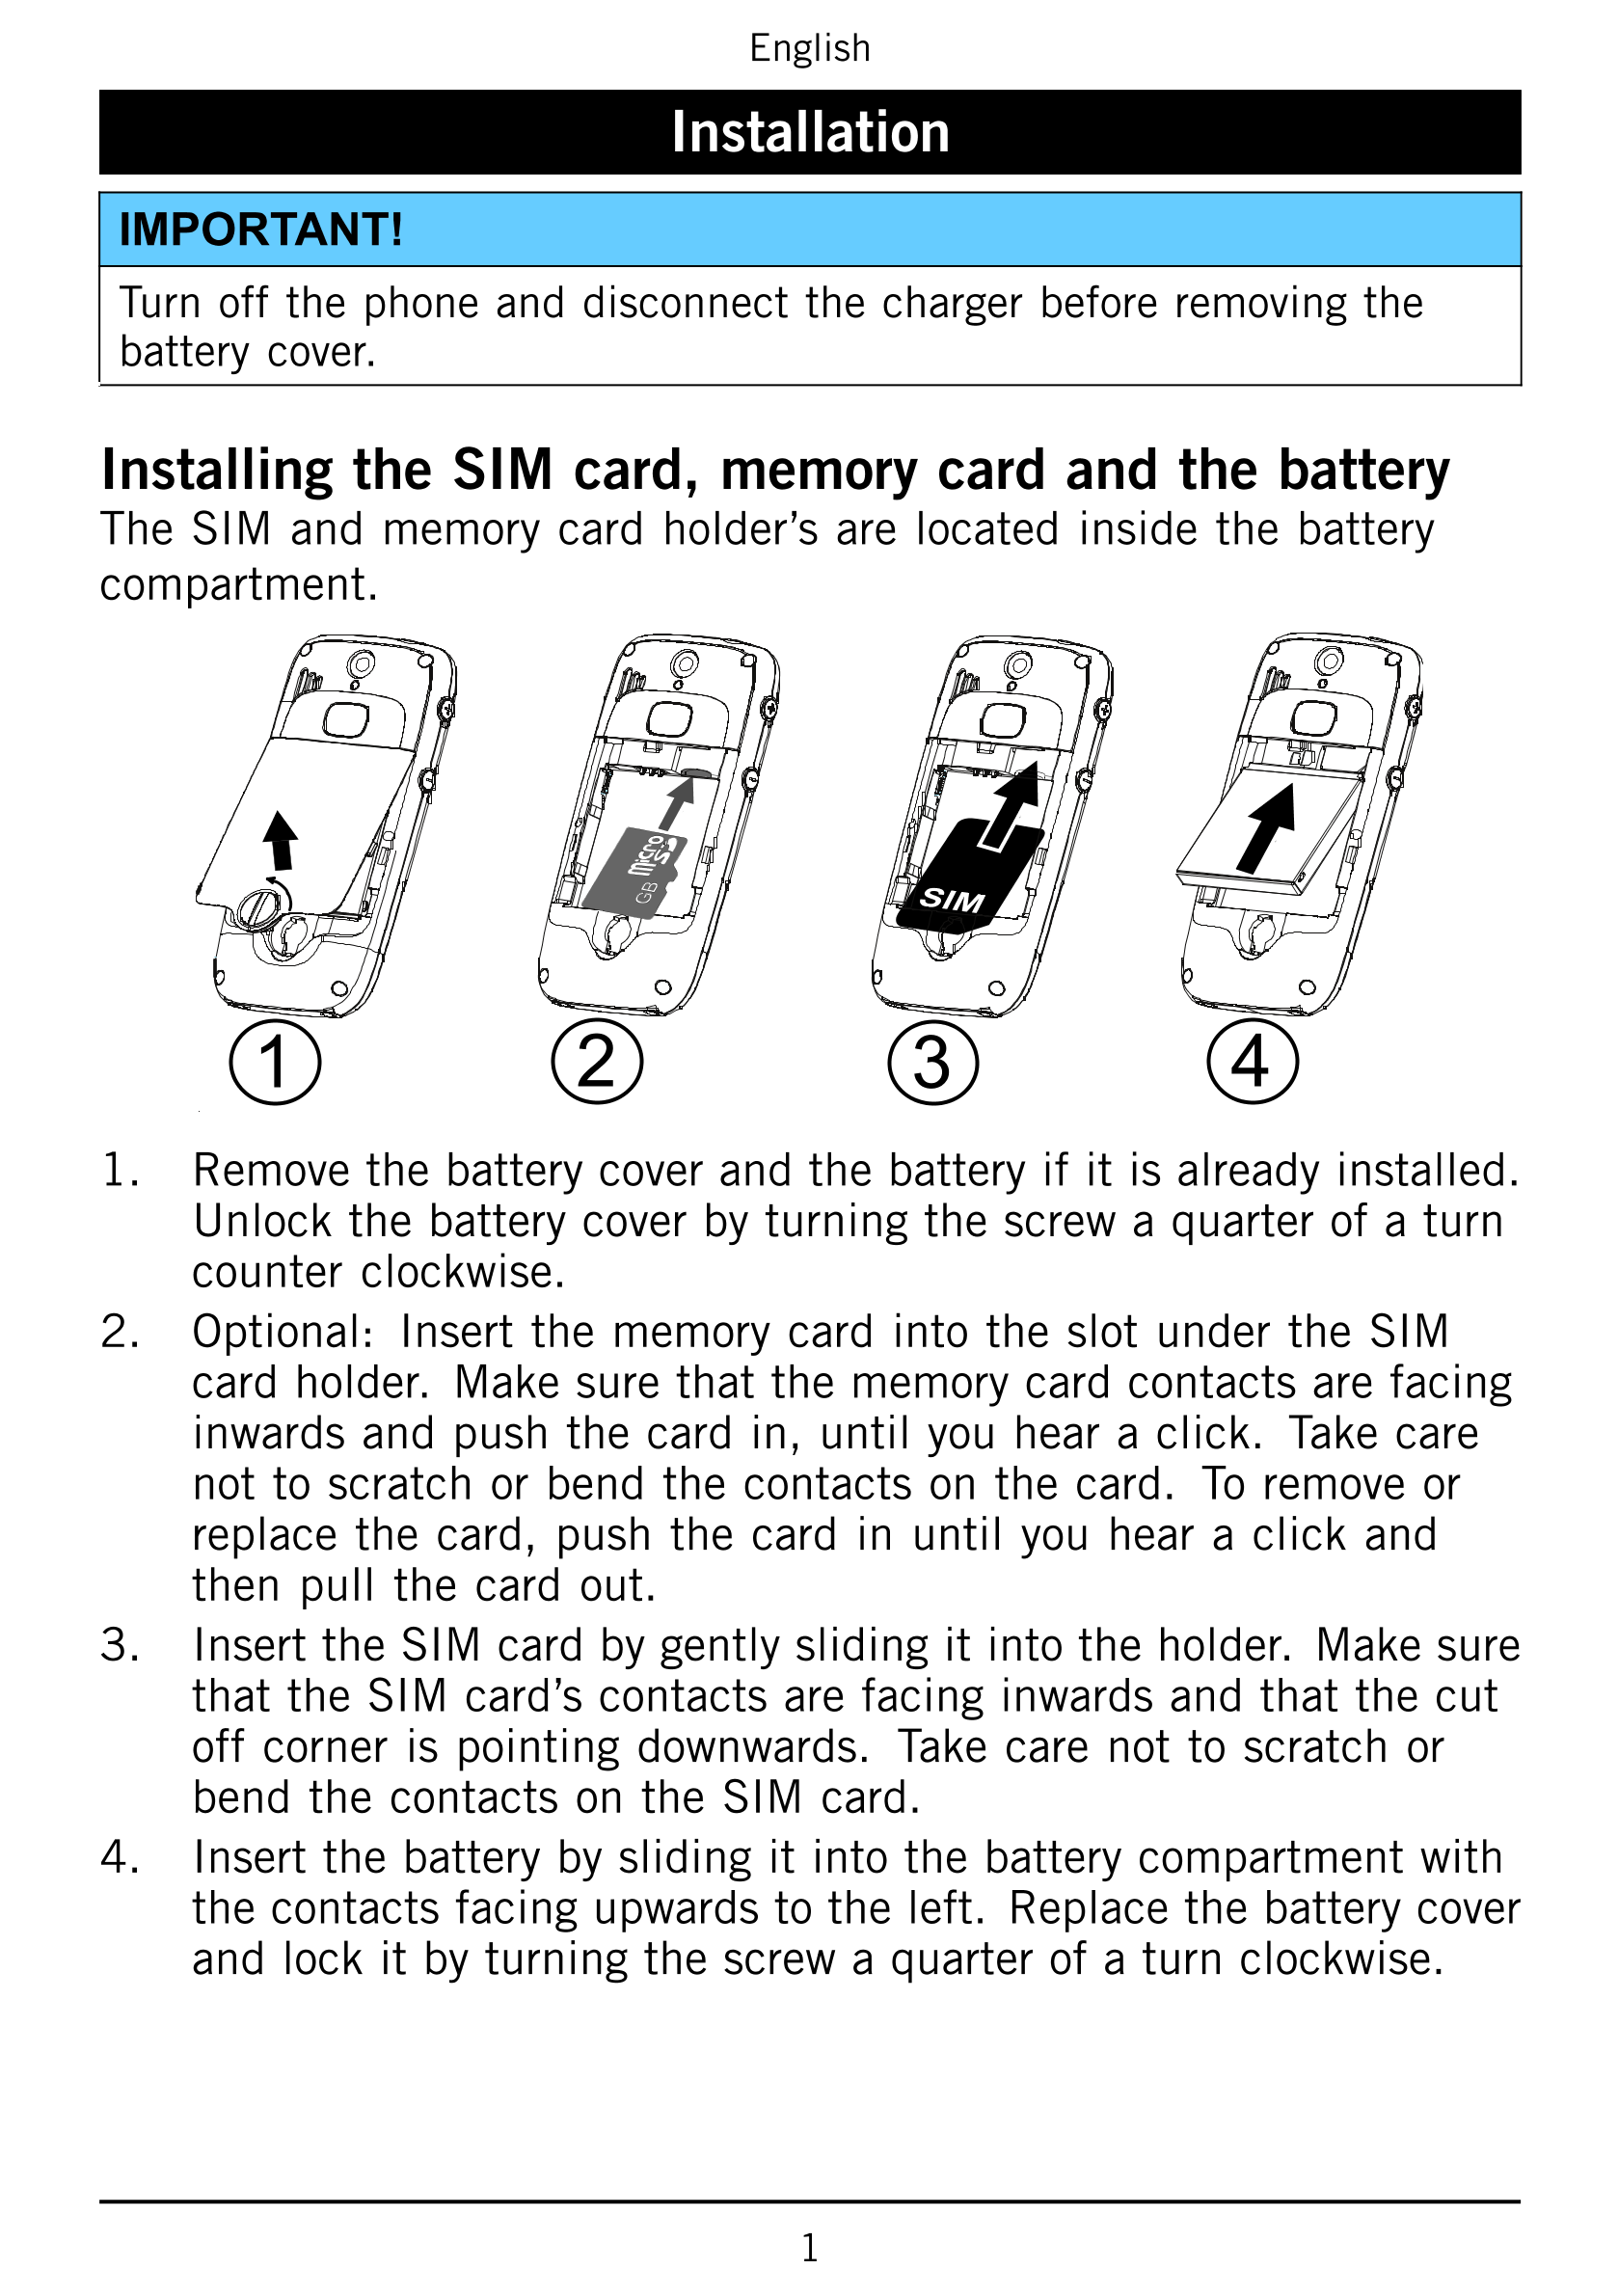 English
Installation
IMPORTANT!
Turn off the phone and disconnect the charger before removing the
battery cover.
Installing the 